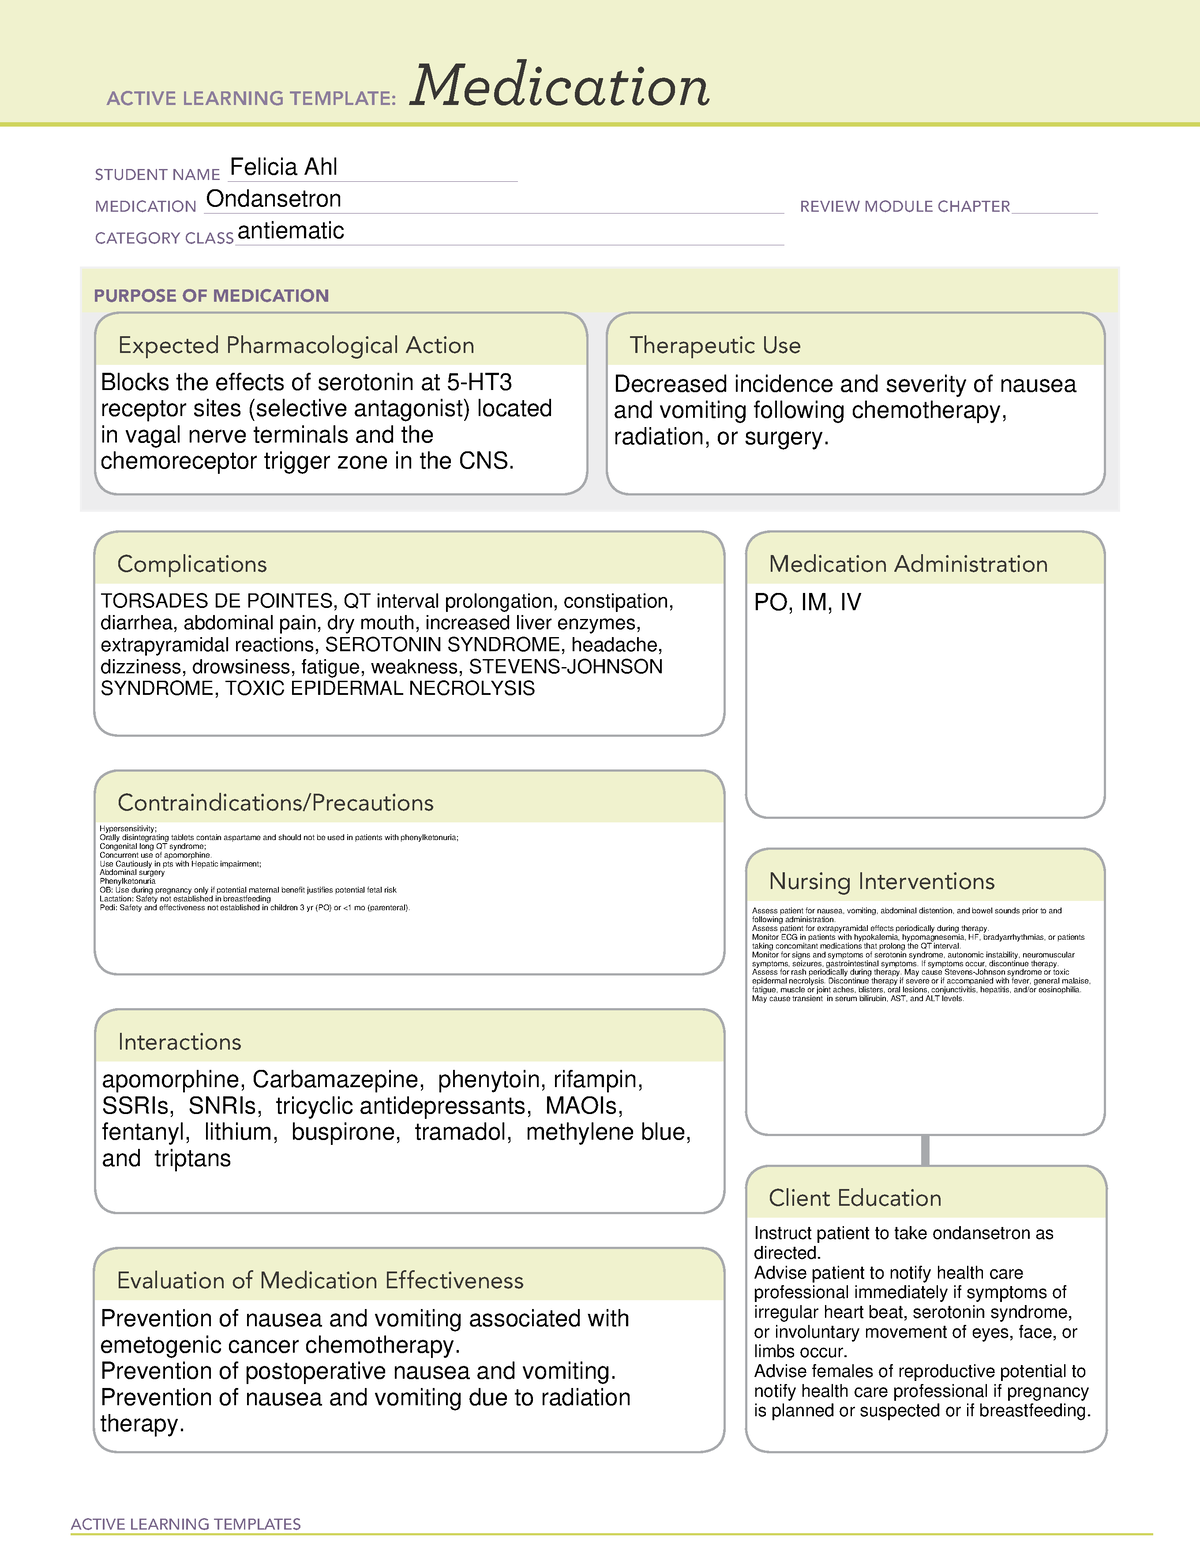 Ondansetron drug cards ACTIVE LEARNING TEMPLATES Medication STUDENT